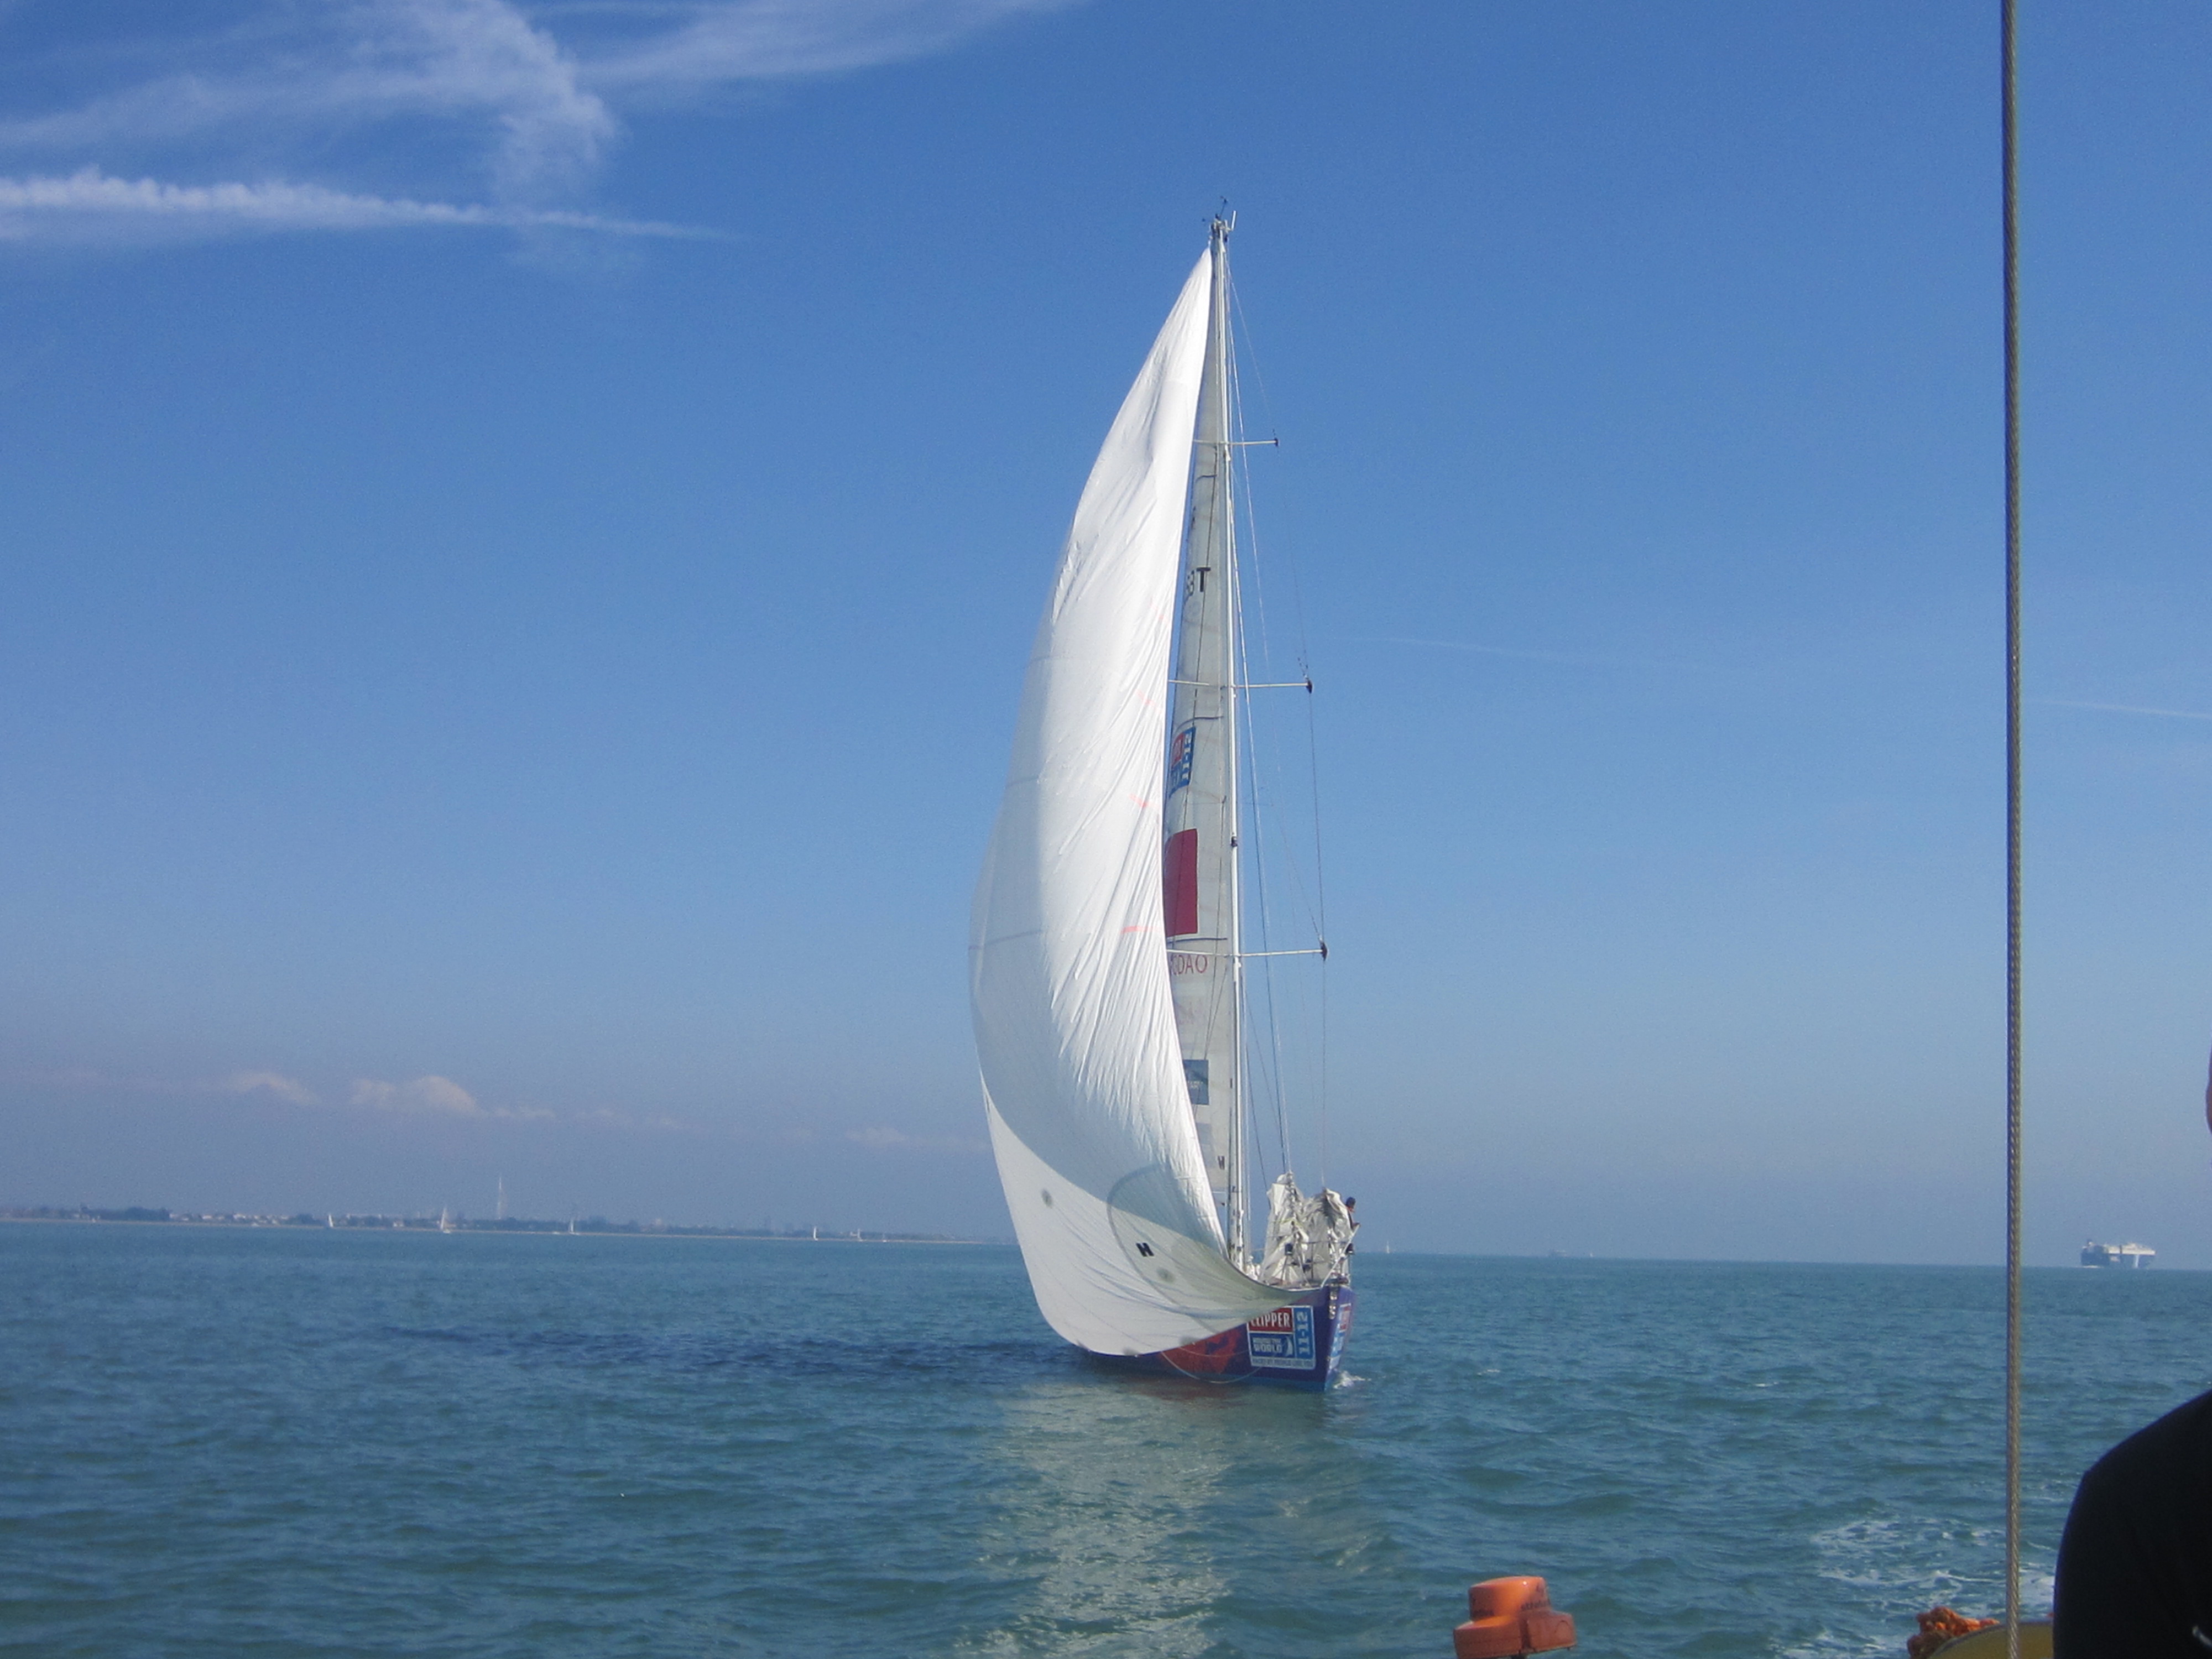 Qingdao flying a spinnaker, taken on another course